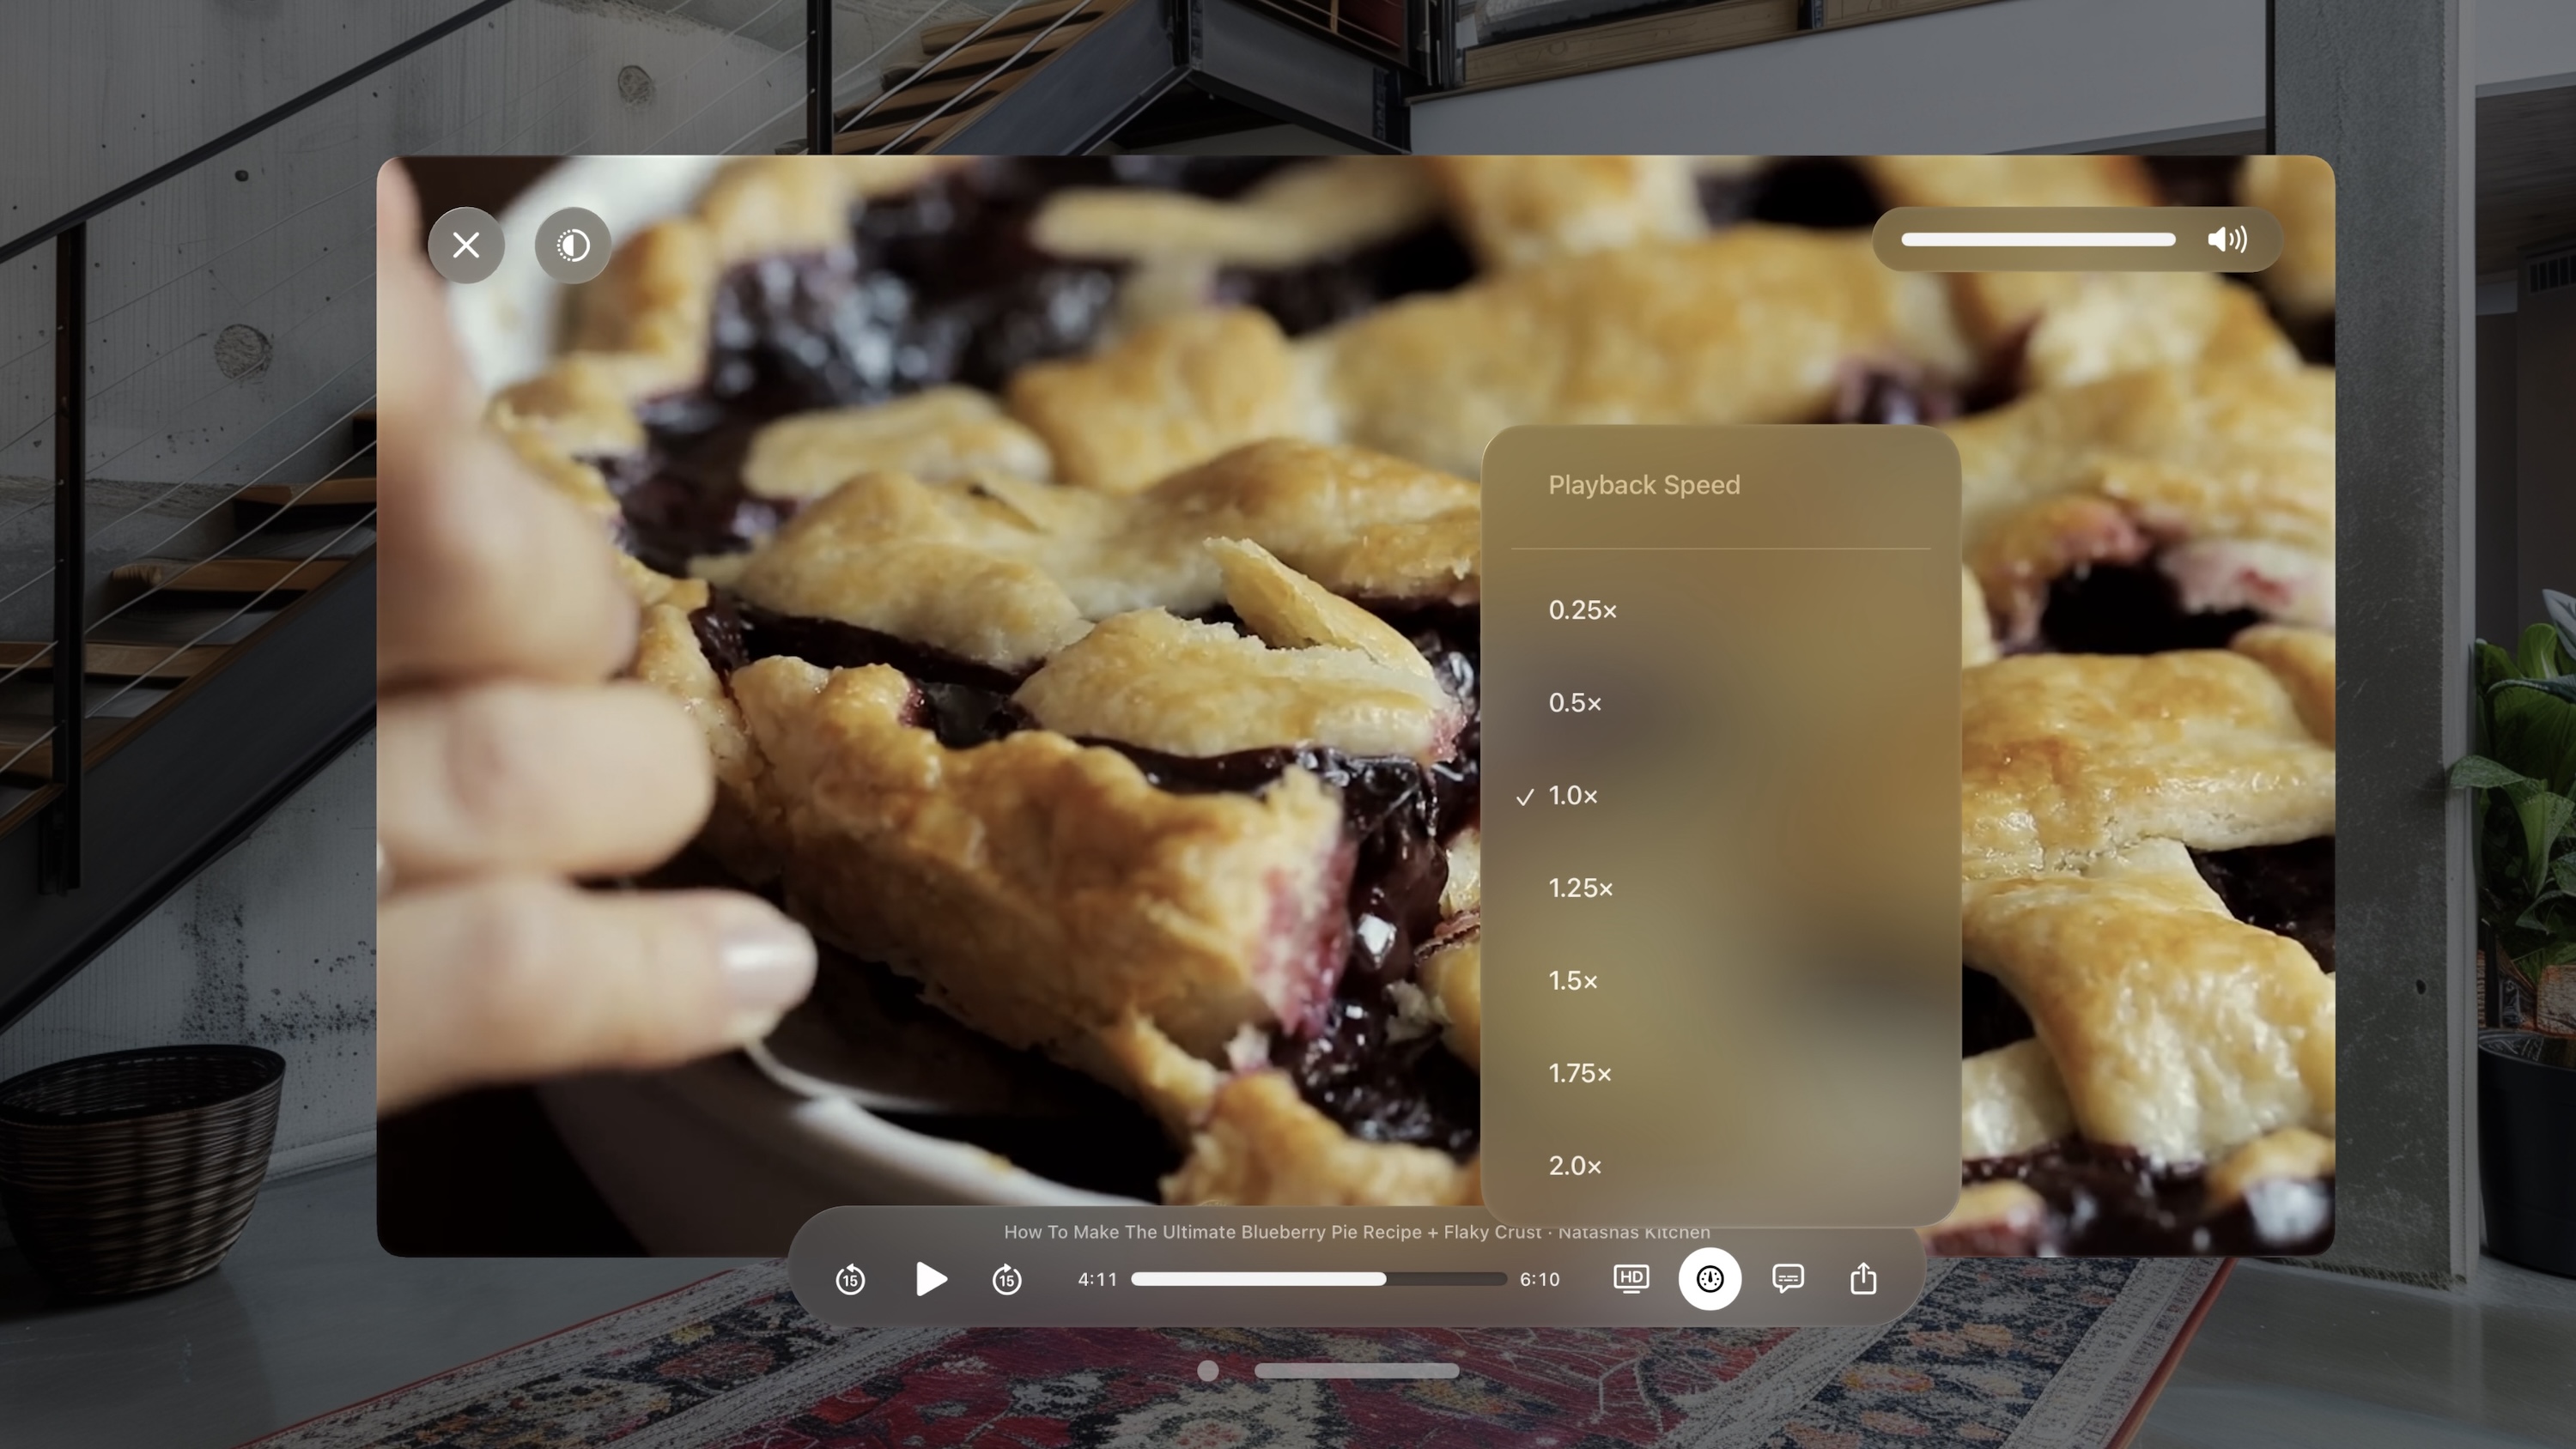 A video about blueberry pie in Juno with the playback speed controls visible